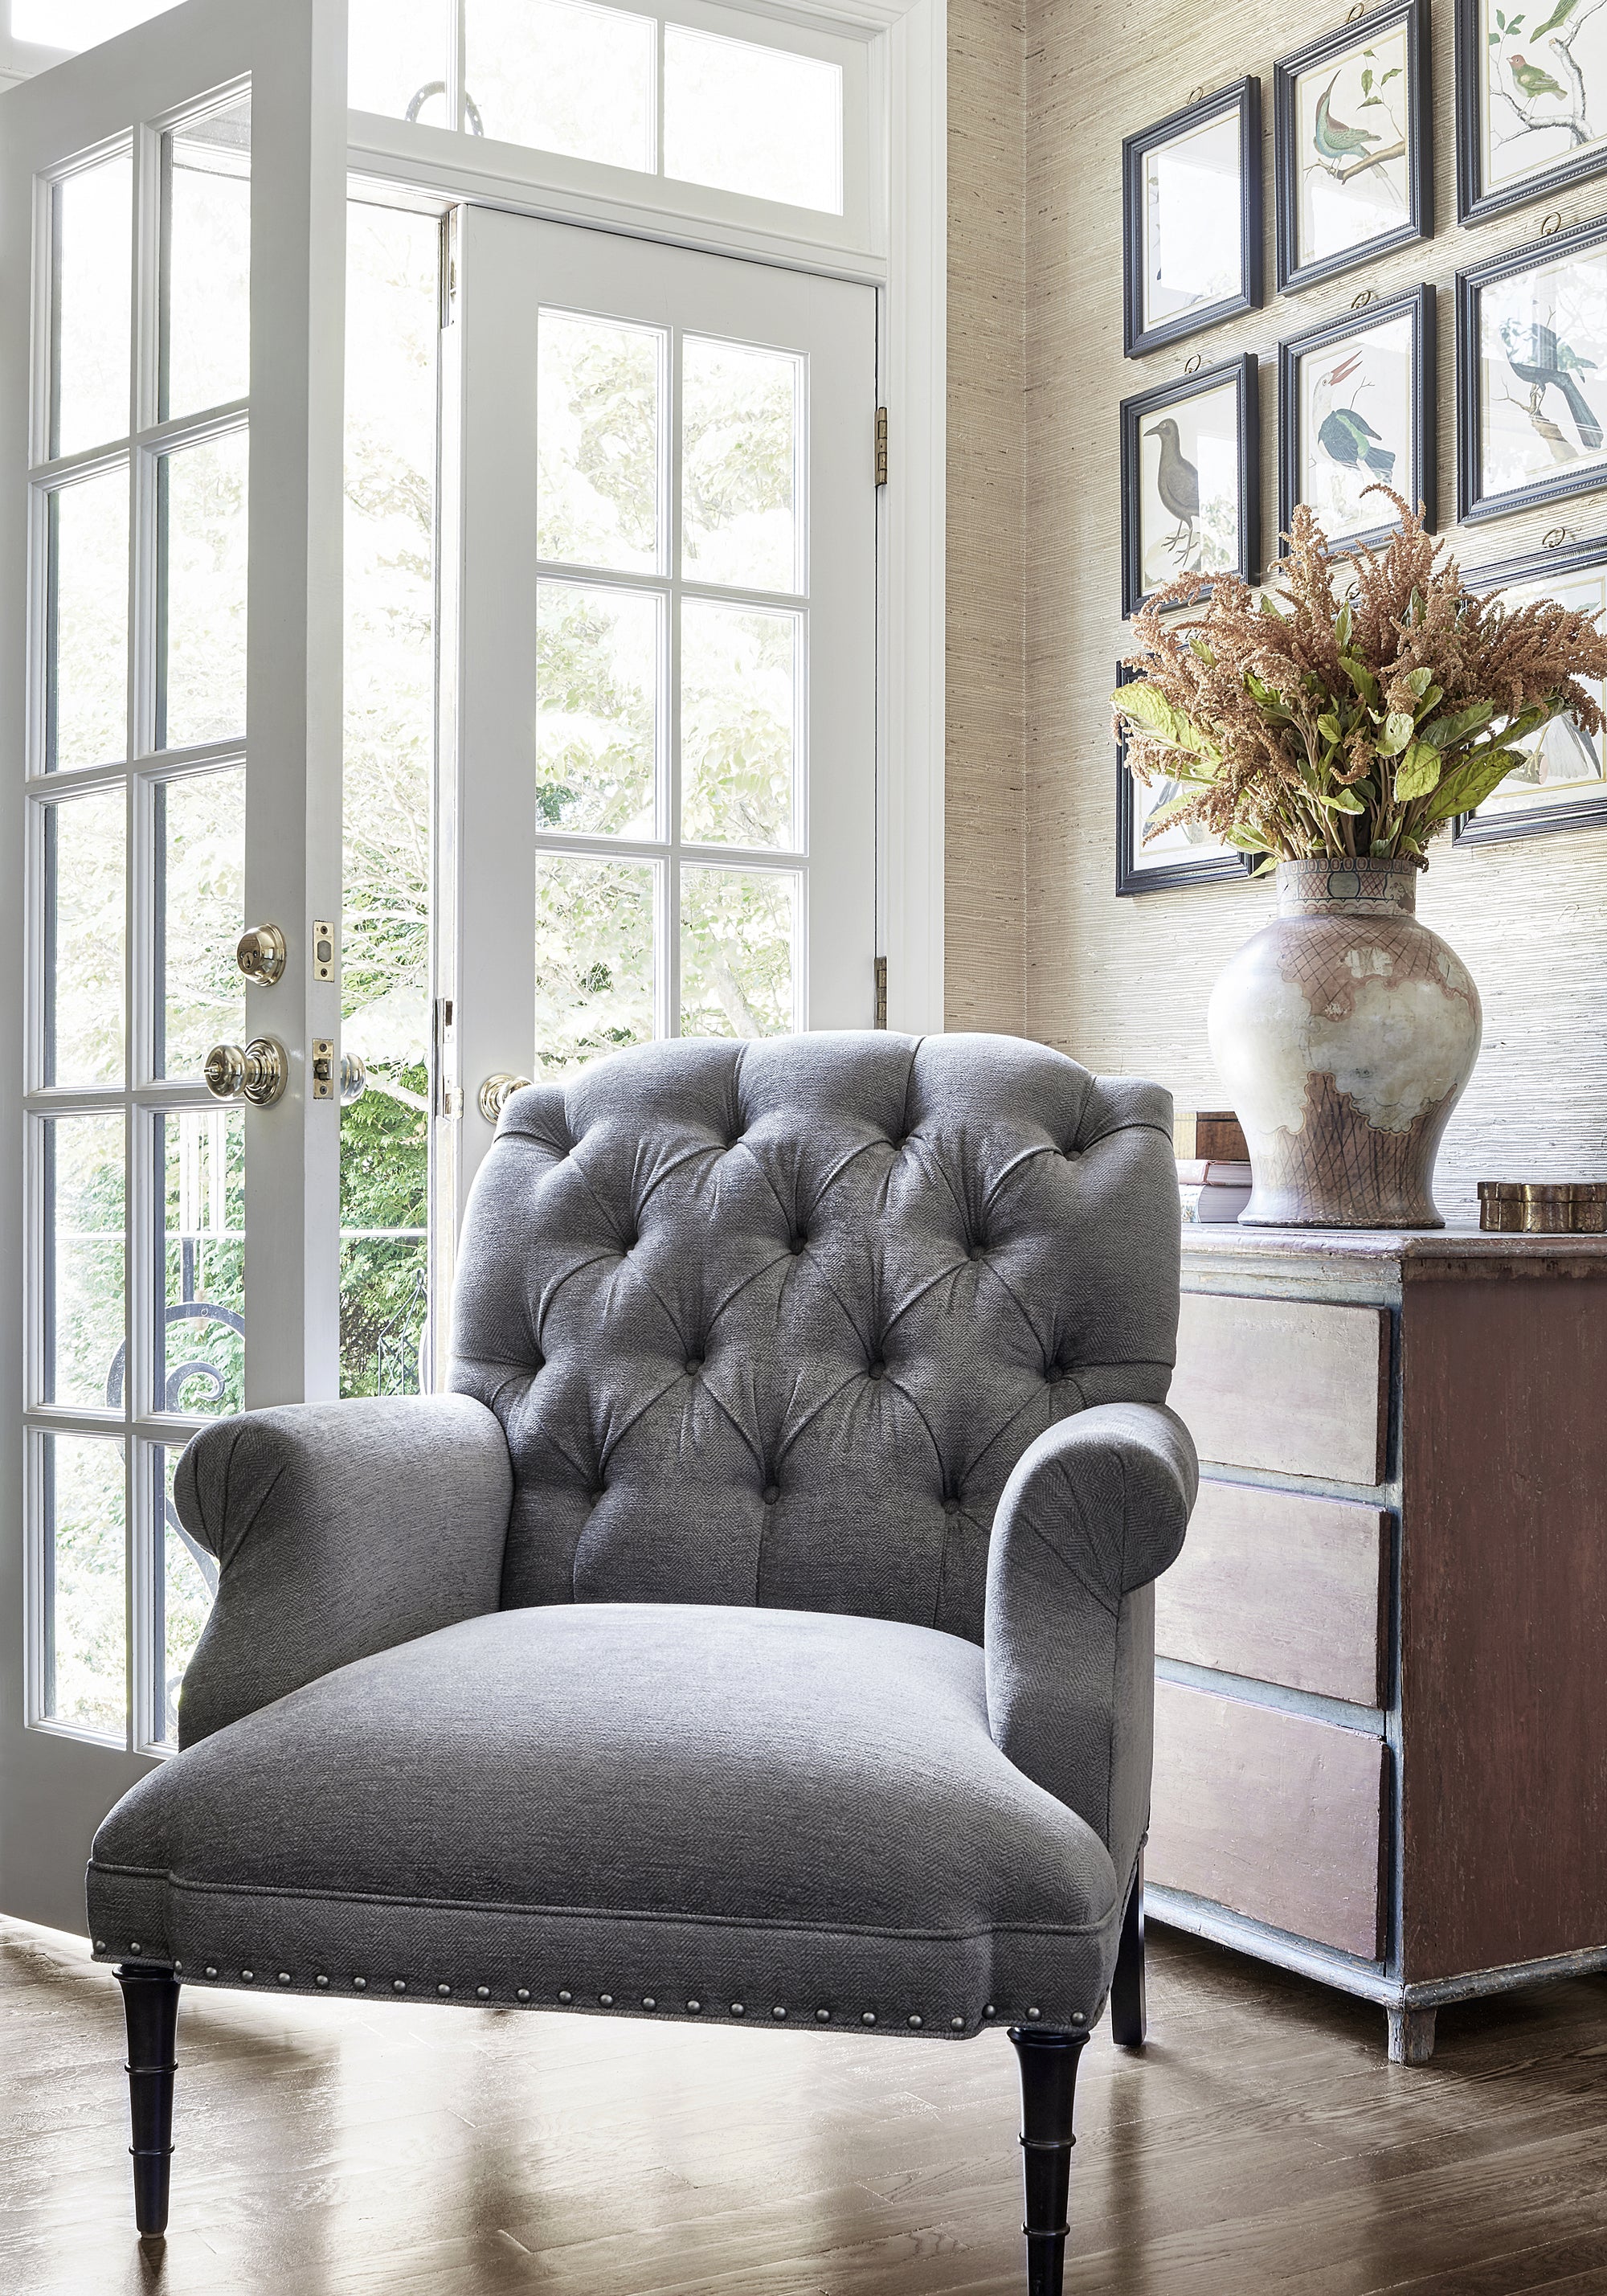 Cheverly Chair in Bronwyn Herringbone woven fabric in charcoal color - pattern number W80685 by Thibaut in the Pinnacle collection